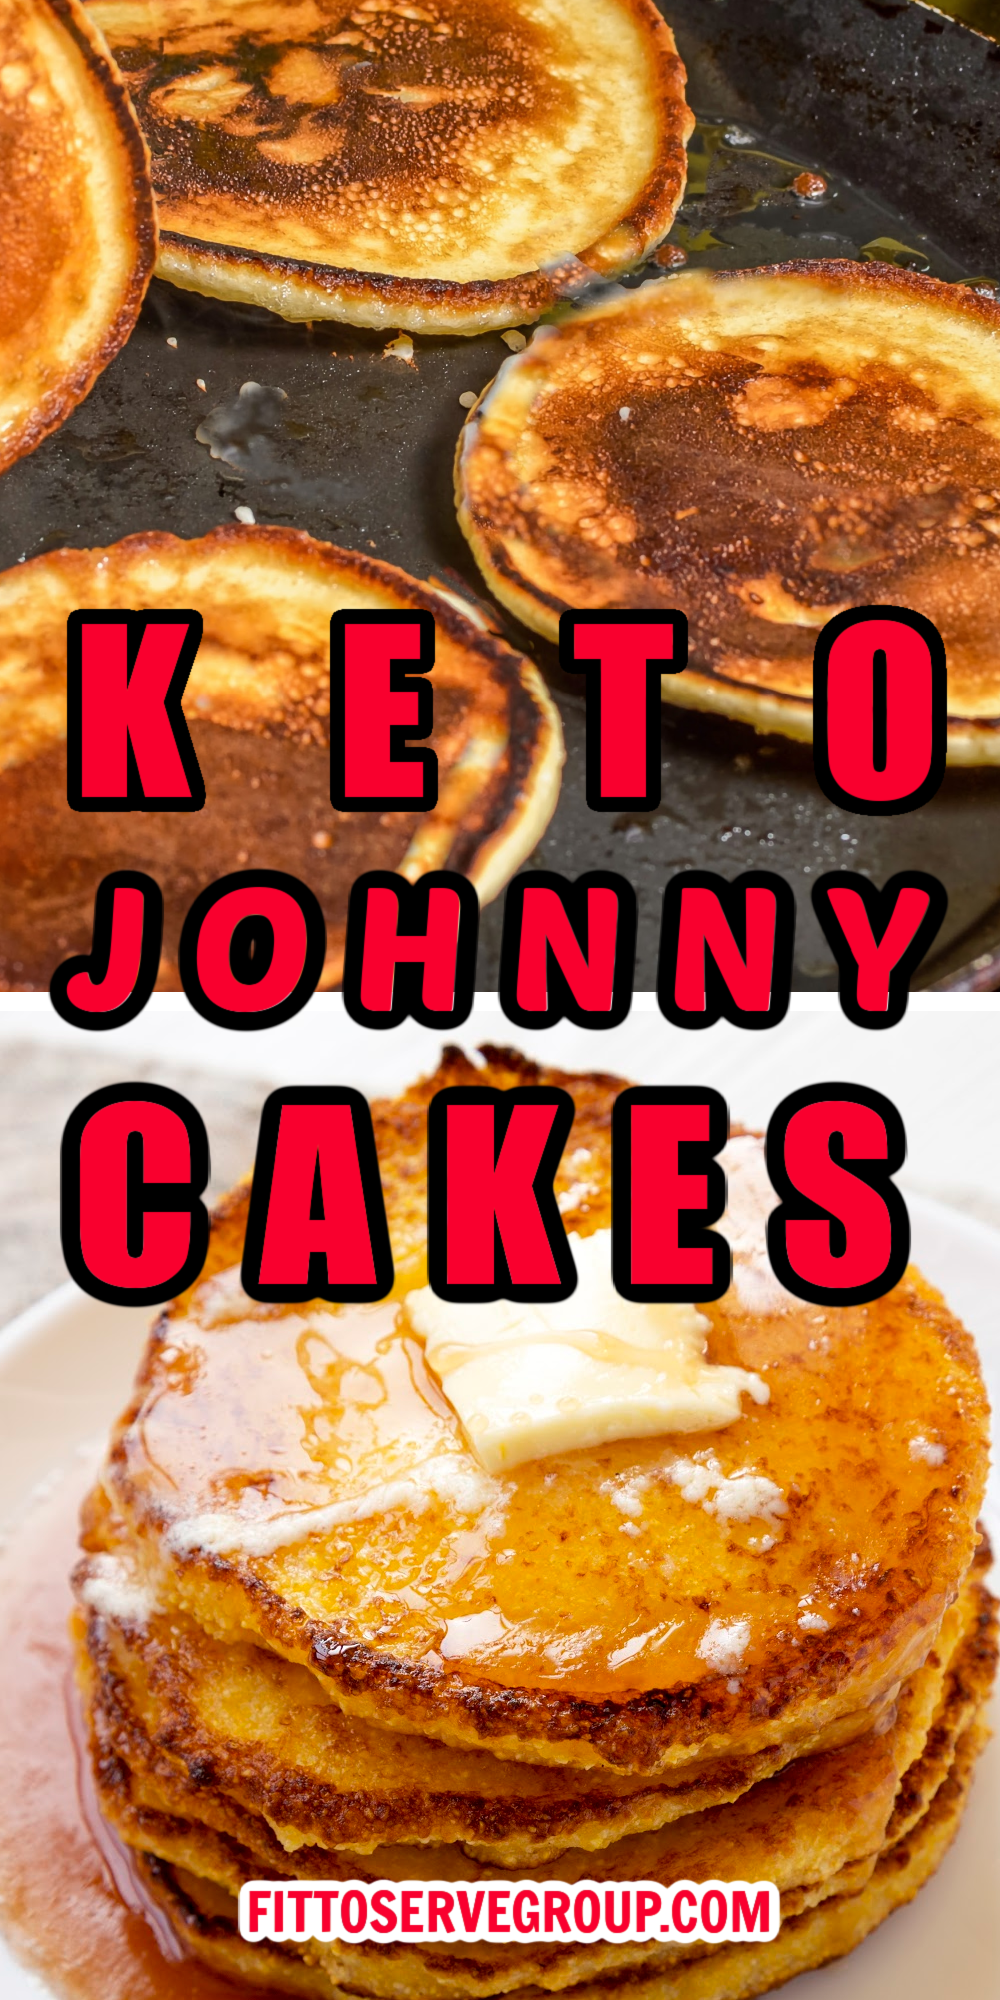 Keto Johnny cakes made in a black skillet and then served stacked on a white plate 